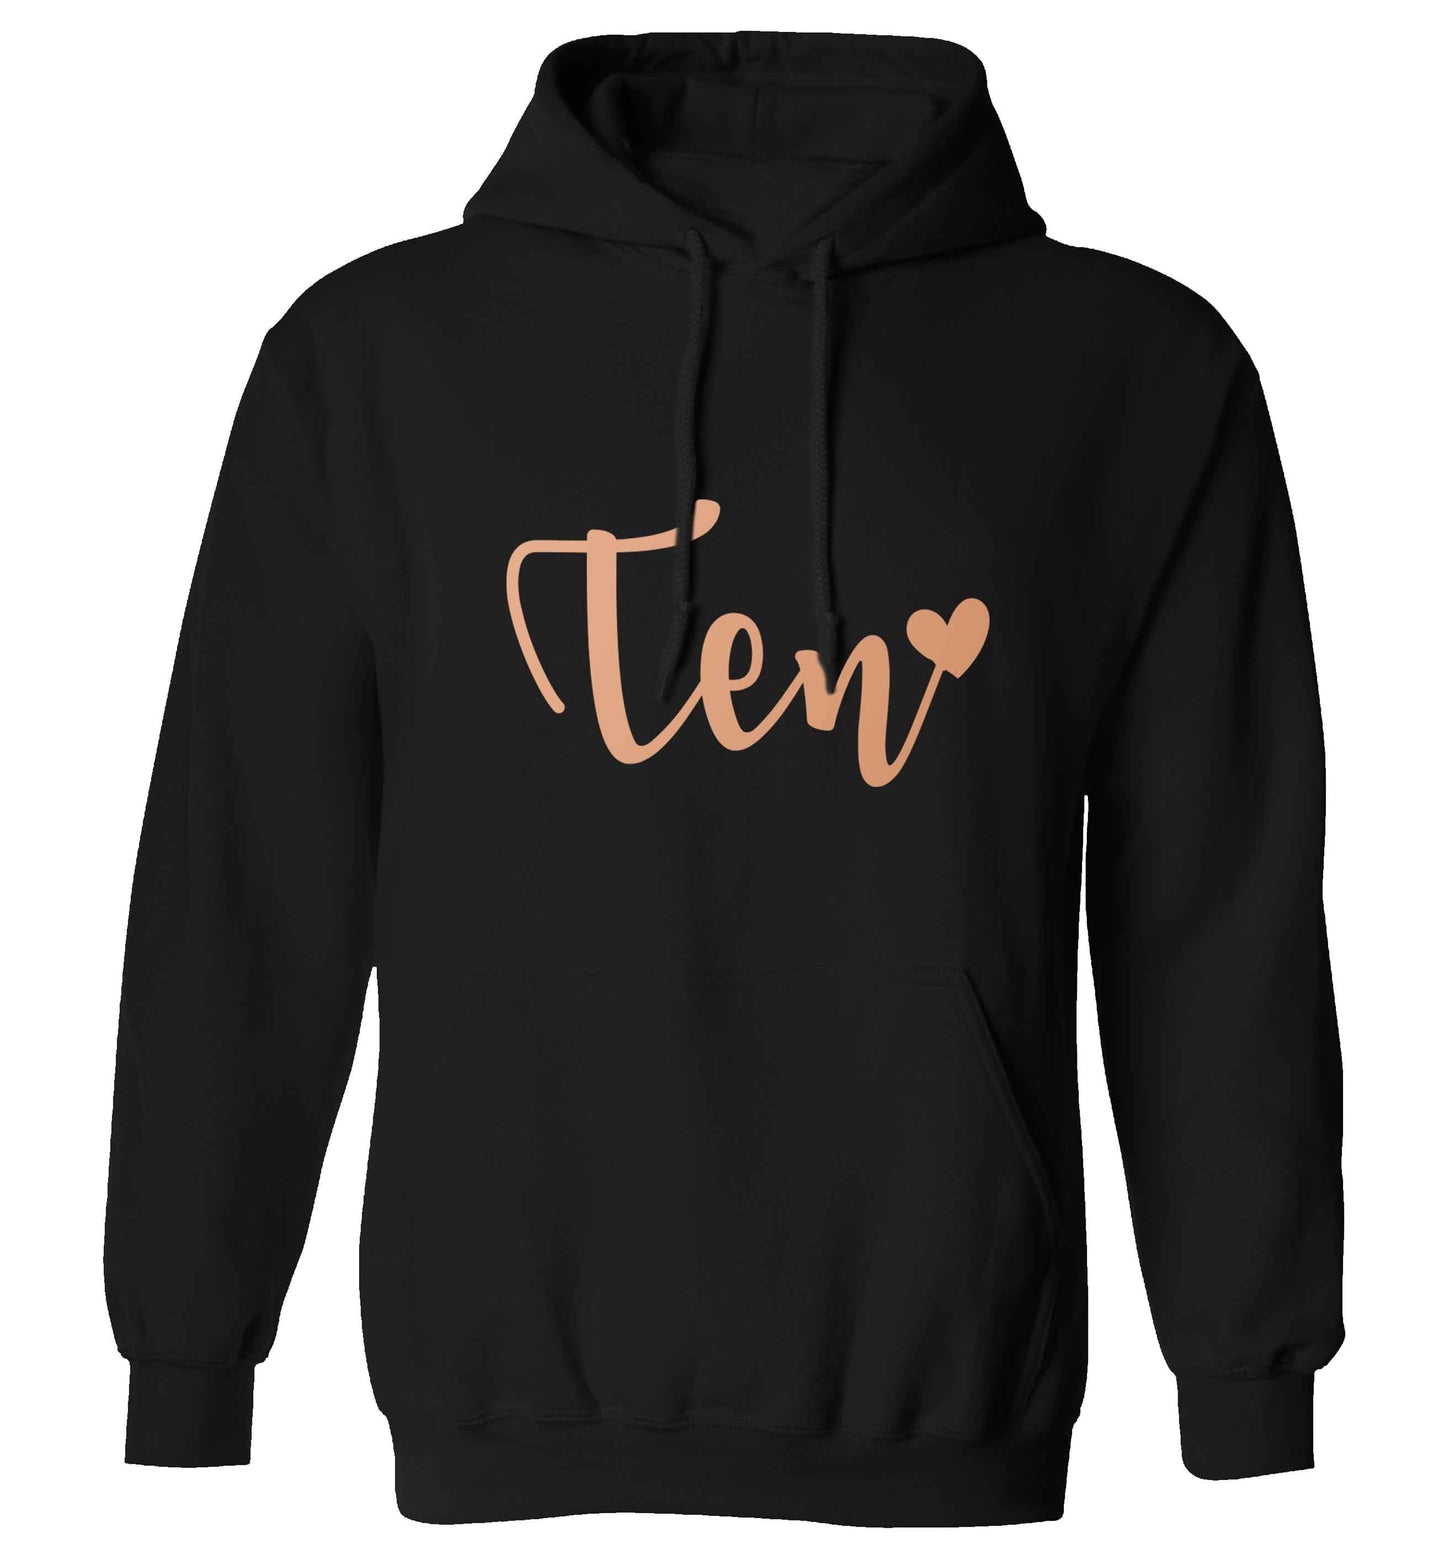 Rose gold eleven adults unisex black hoodie 2XL